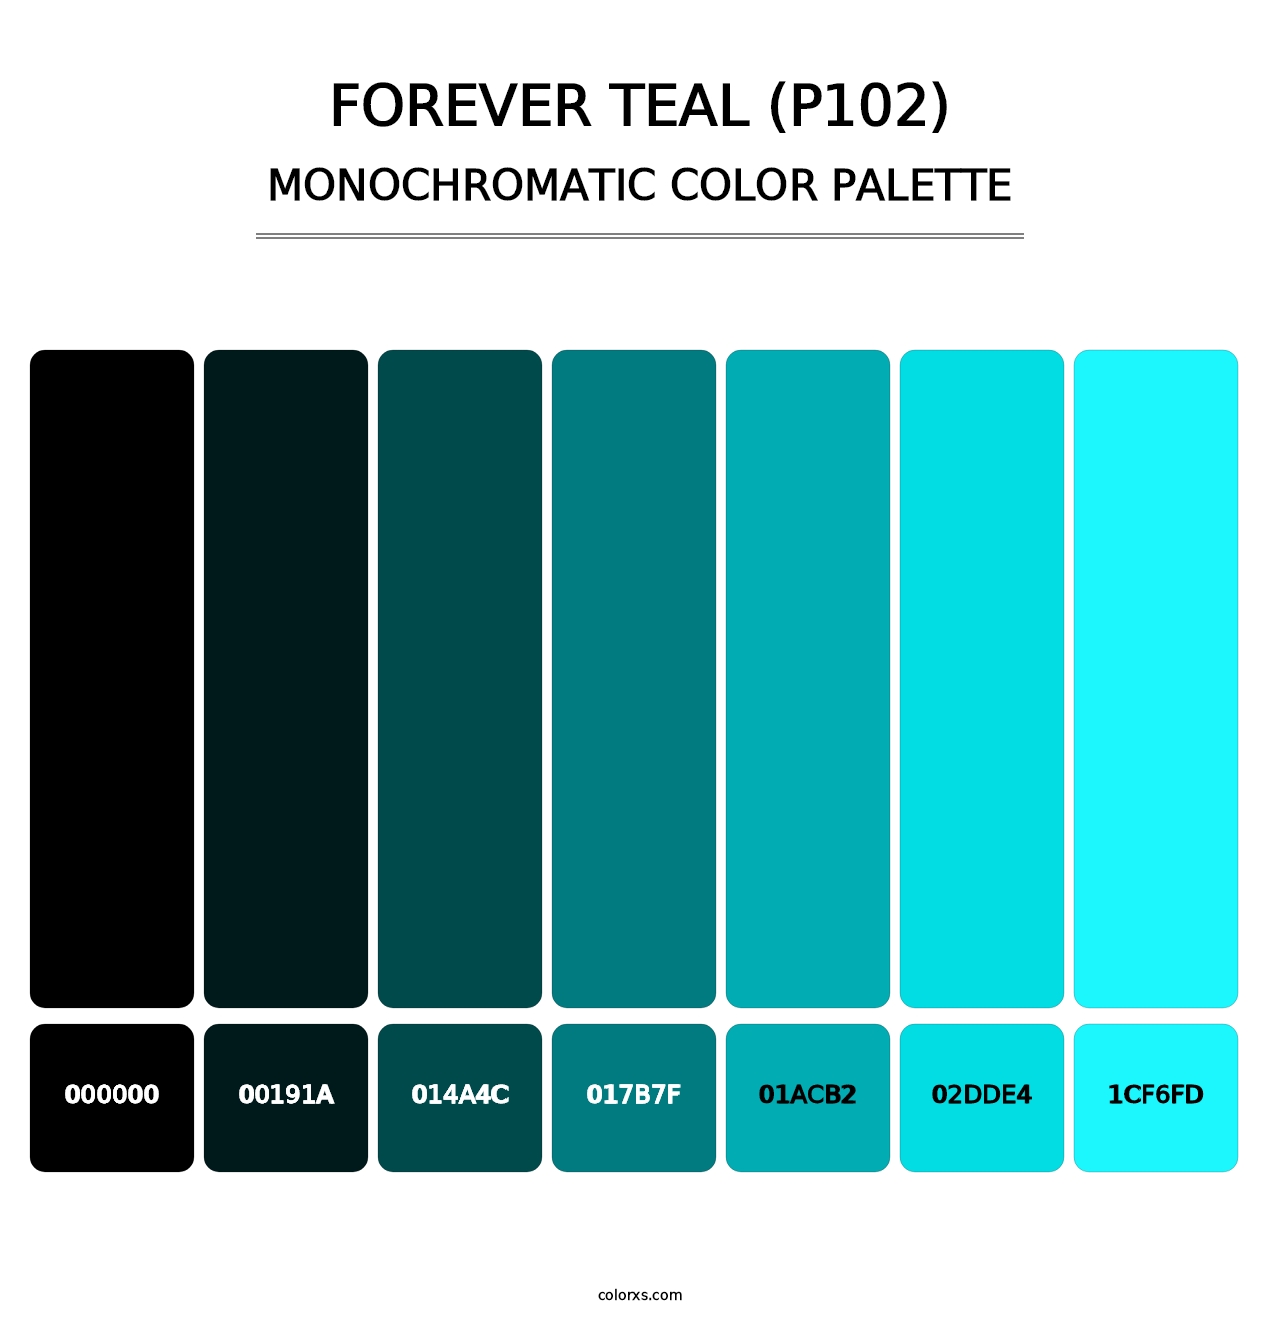 Forever Teal (P102) - Monochromatic Color Palette